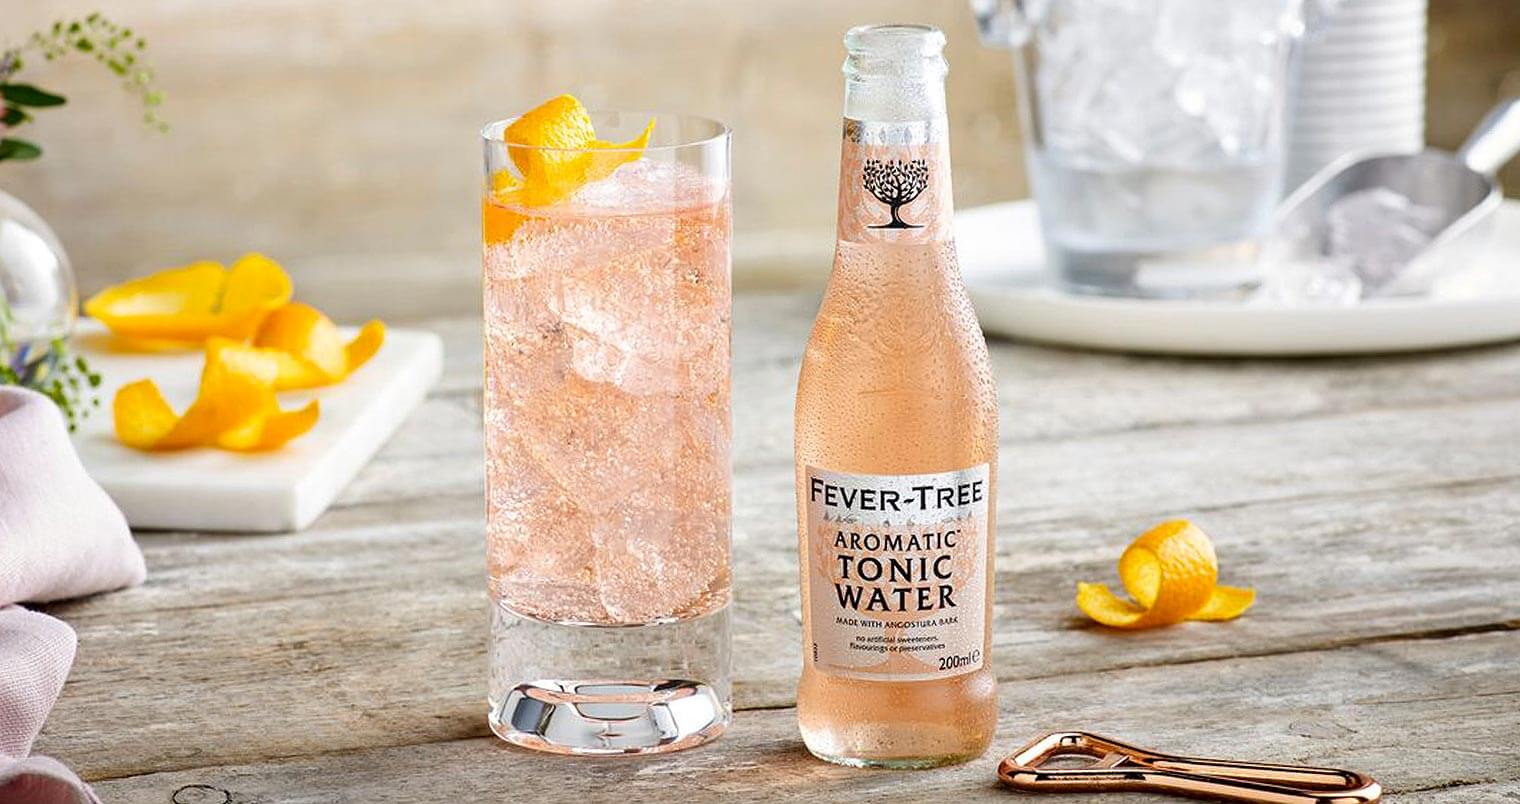 Fever Tree Pink Aromatic Tonic, bottle and glass, featured image